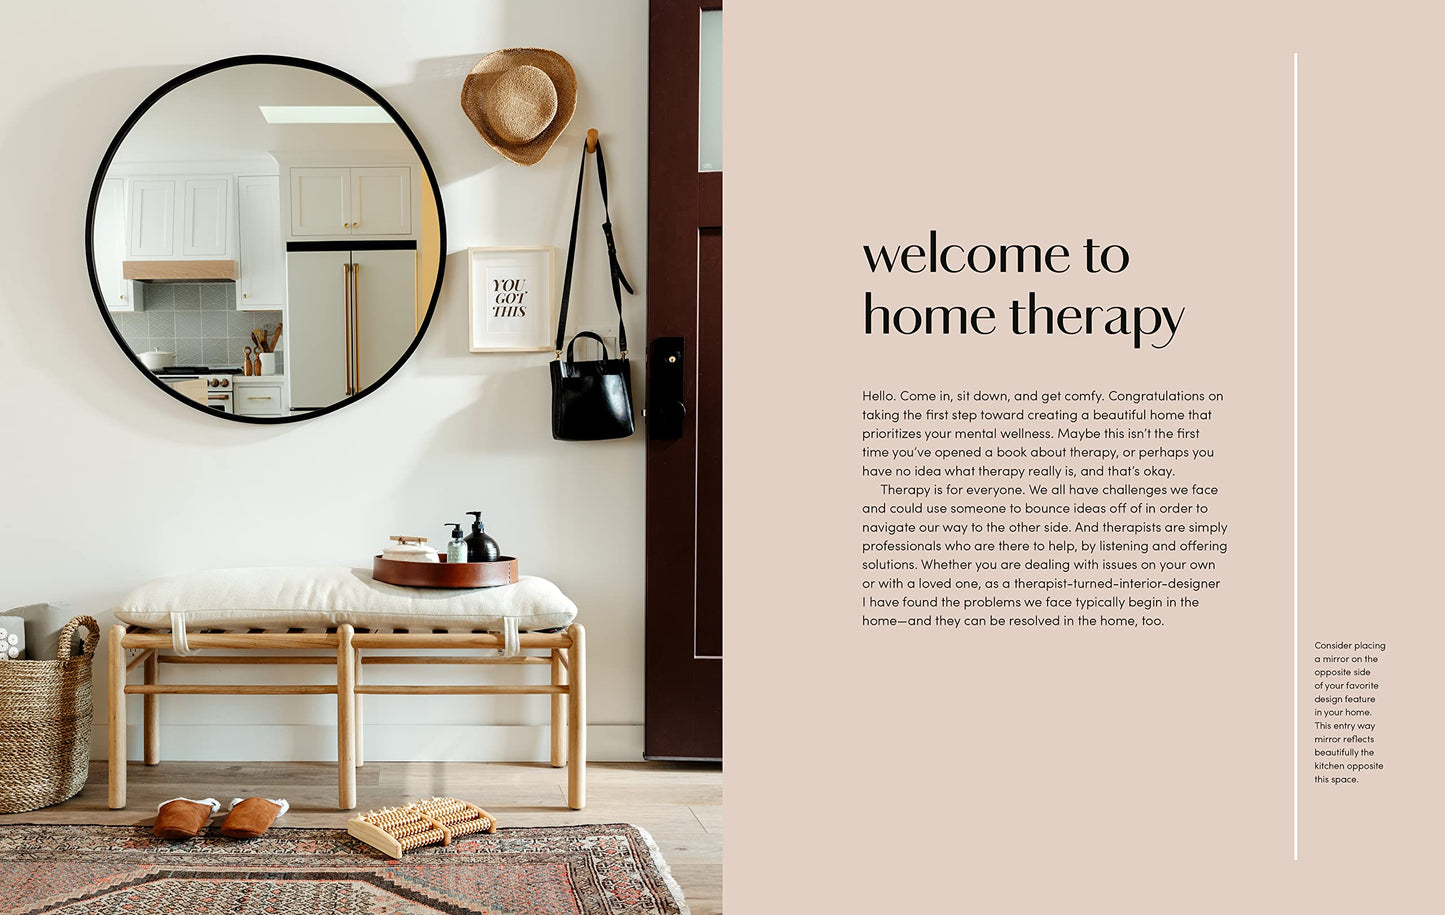 Home Therapy: Interior Design for Increasing Happiness, Boosting Confidence, and Creating Calm